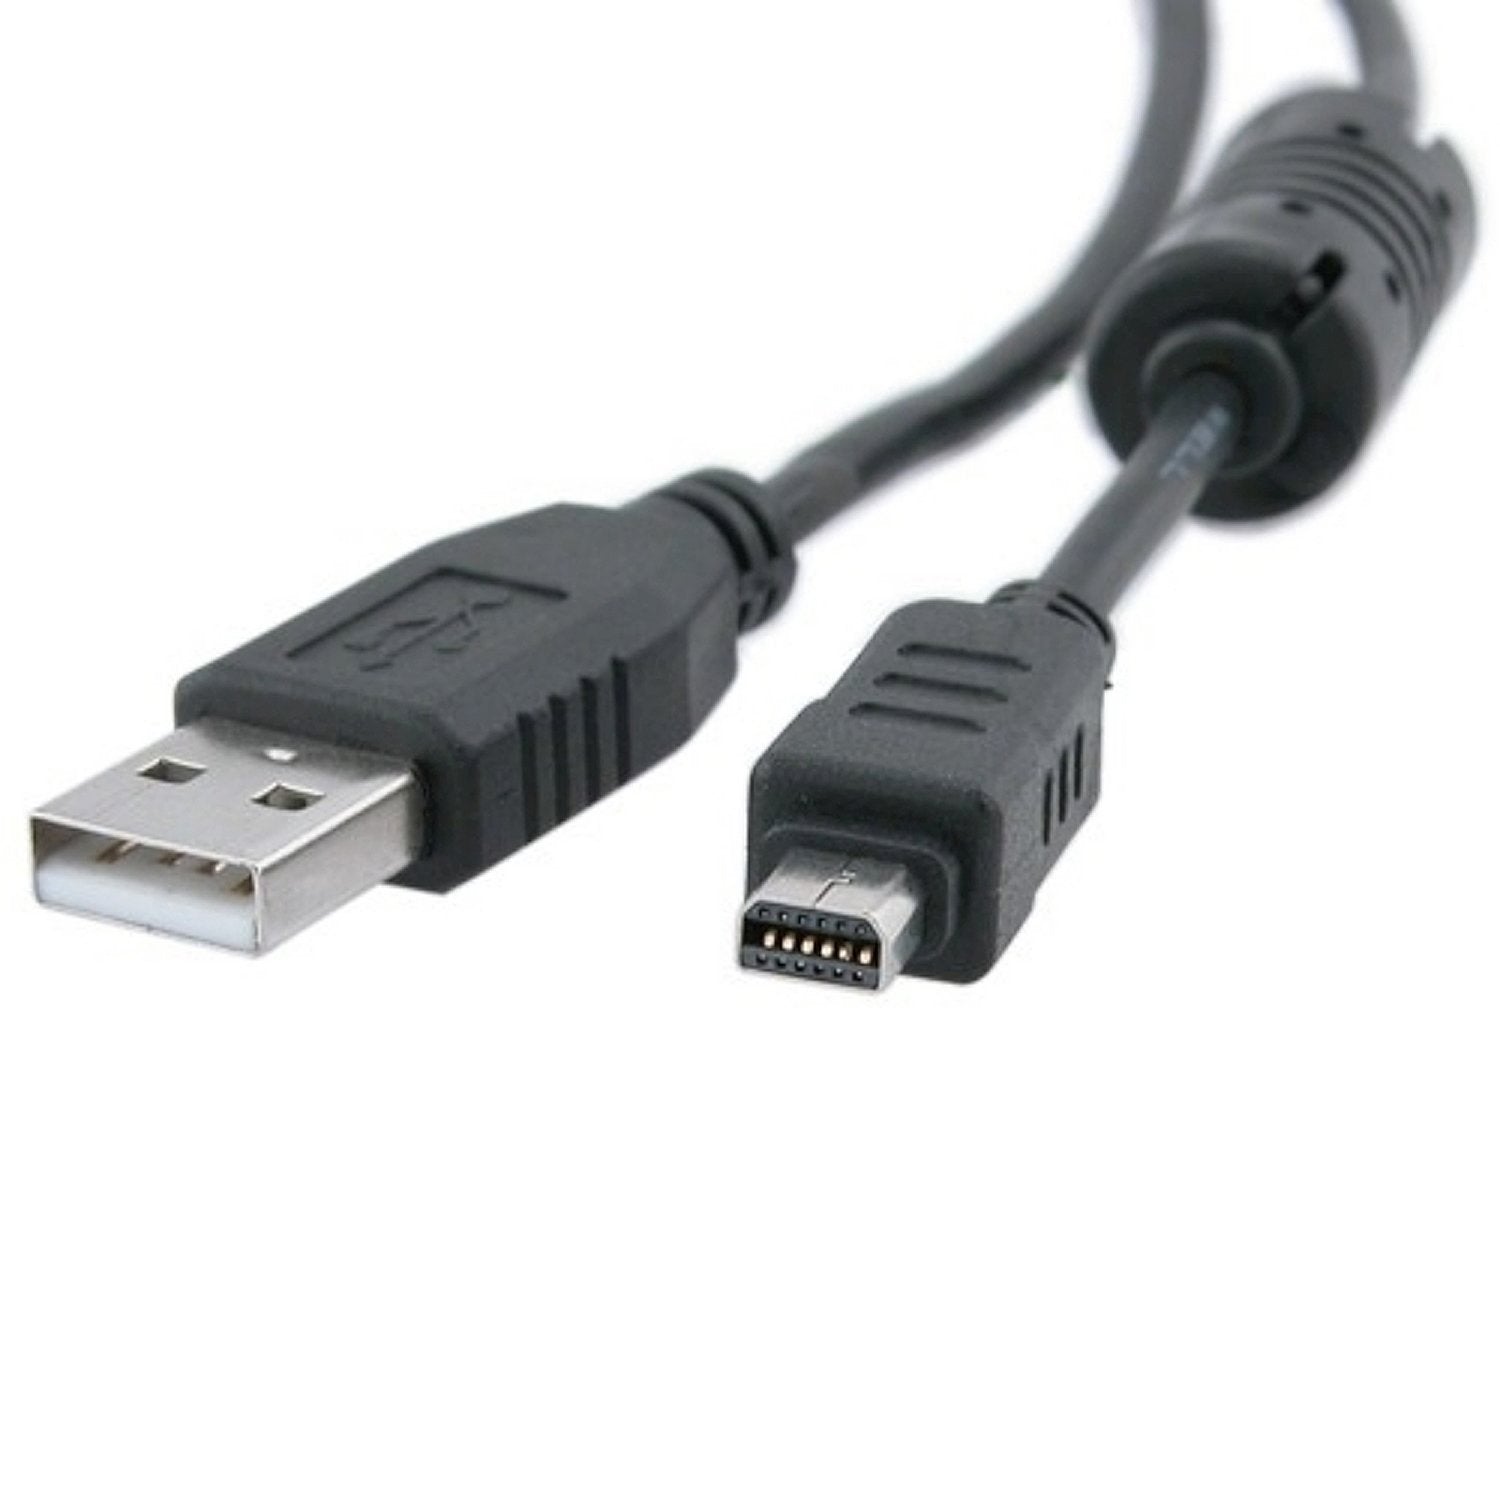 USB cable for Olympus OM-D E-M10